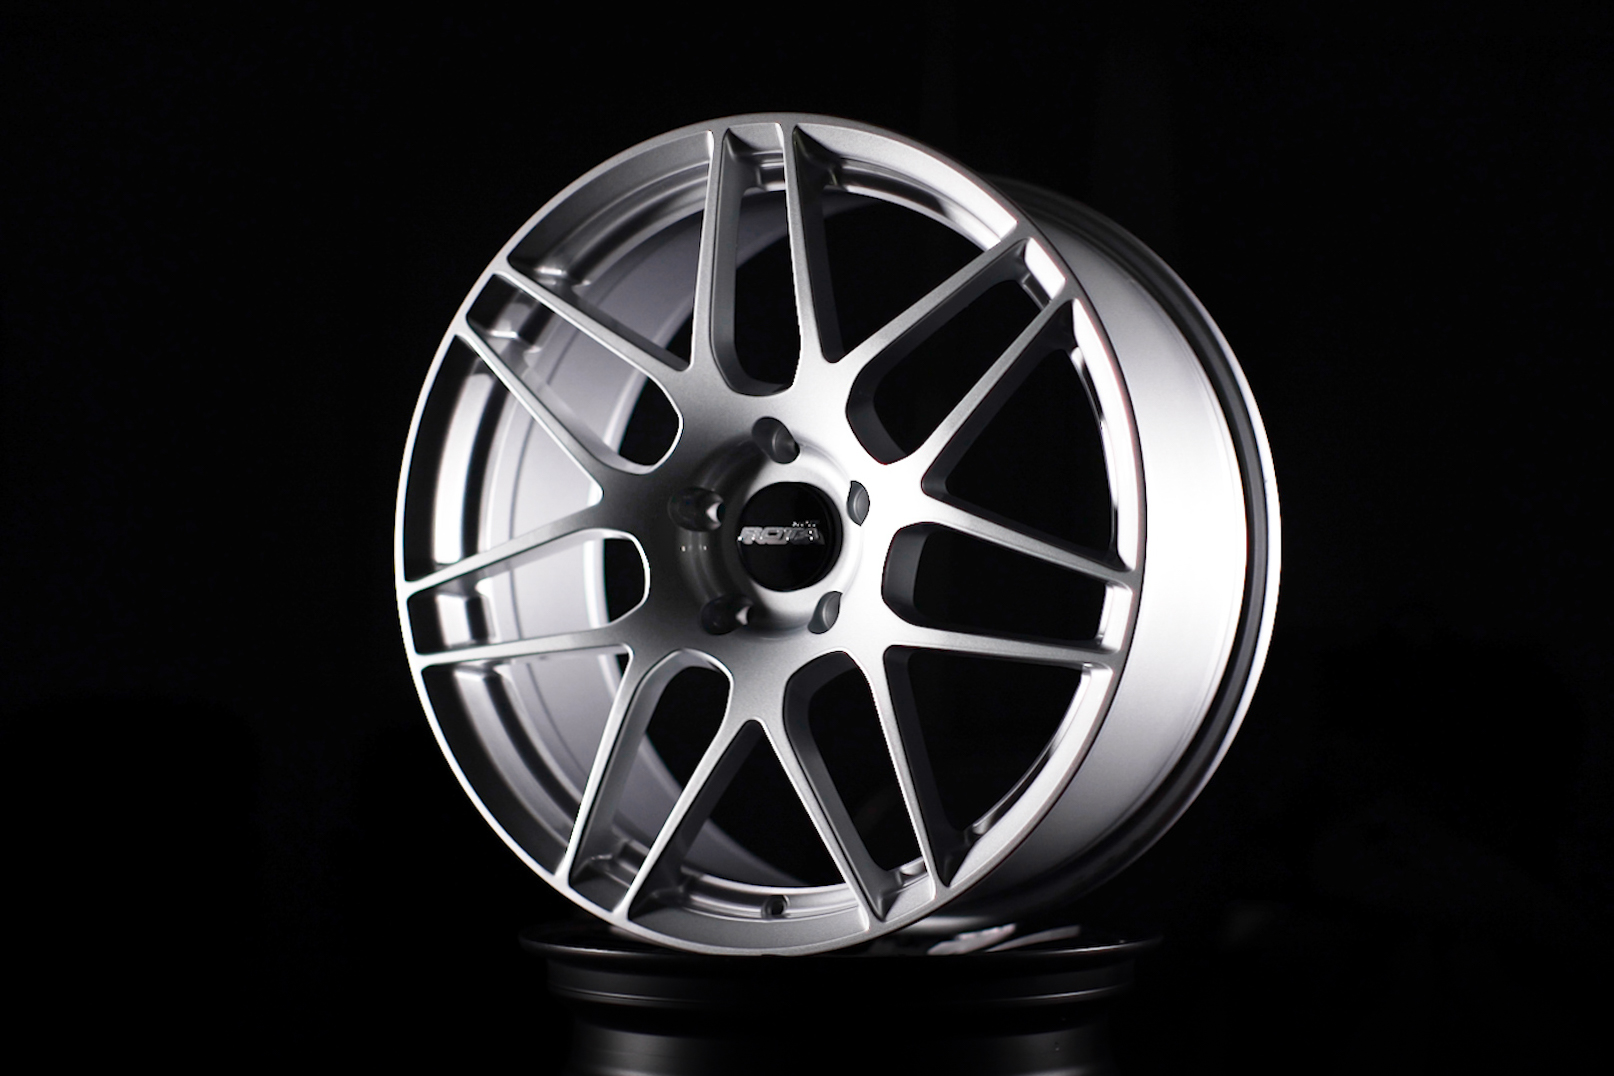 360 forged. Rota (Philippine Aluminum Wheels, Inc.). Диски Forged. Литые диски Semi Forged. Литья на 20 360 Forged.